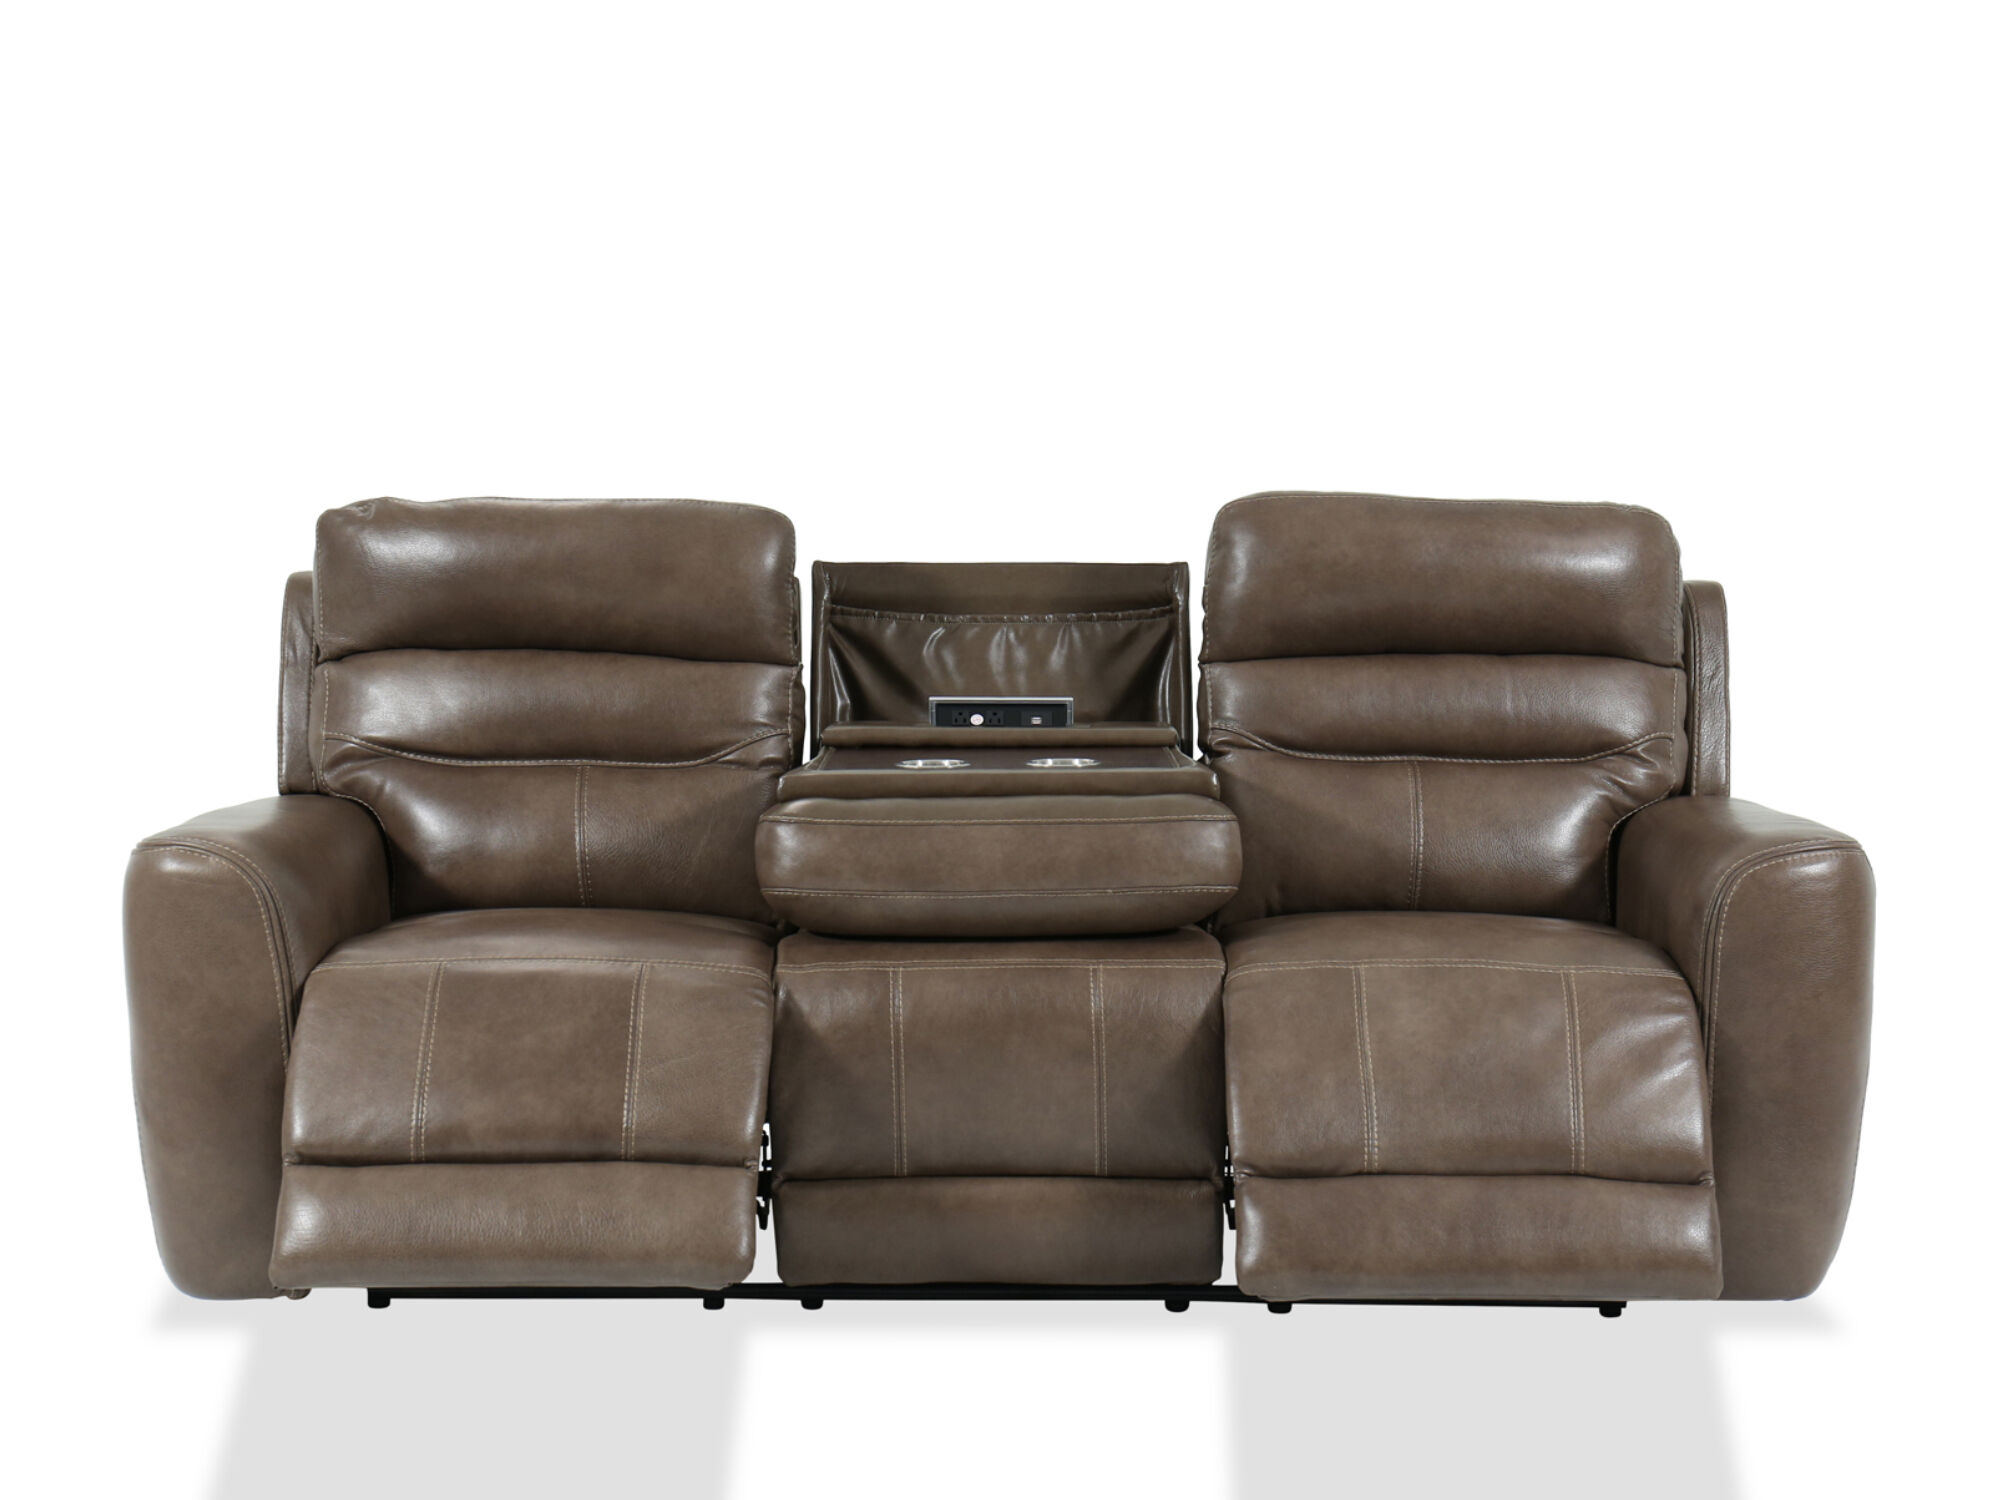 Creed 90 Leather Power Reclining Sofa, Leather Electric Reclining Sofa